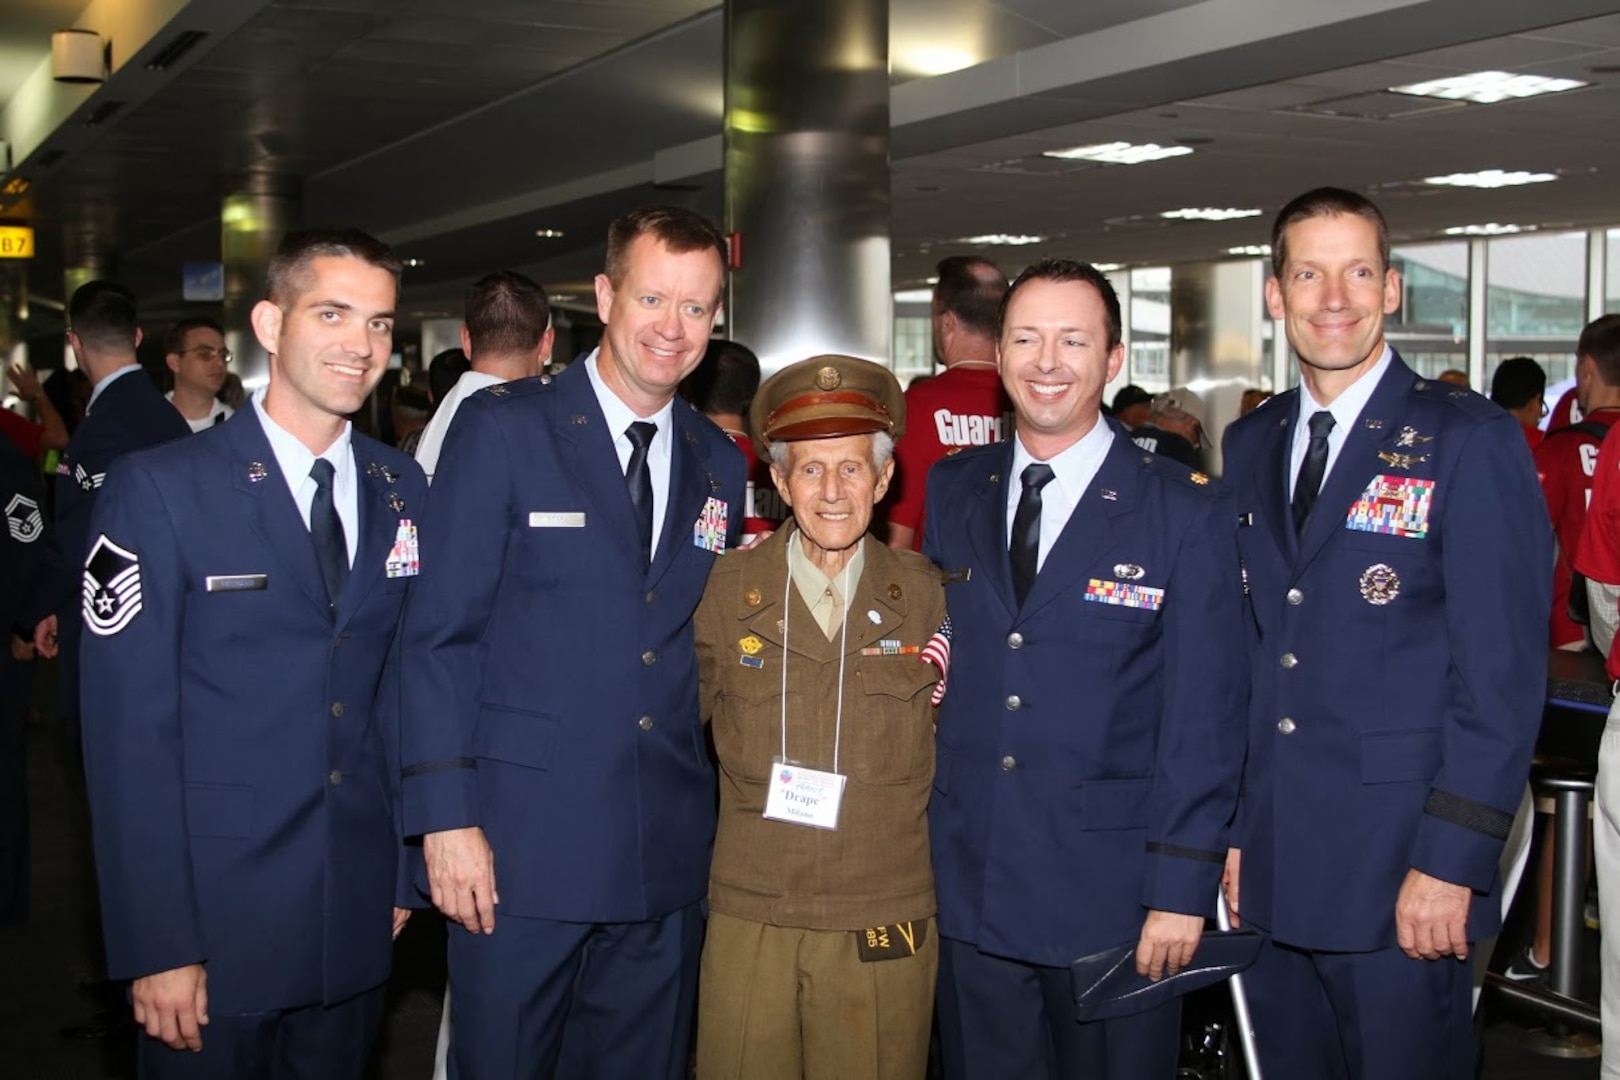 A World War II veteran poses for a photo with members of Air Forces Cyber at Baltimore Washington International Airport Sept. 28. Nearly 400 veterans from World War II, the Korean War and the Vietnam War were greeted by memers of the Air Forces Cyber as they visited Washintton, D.C., to visit their respective memorials. (Courtesy photo)